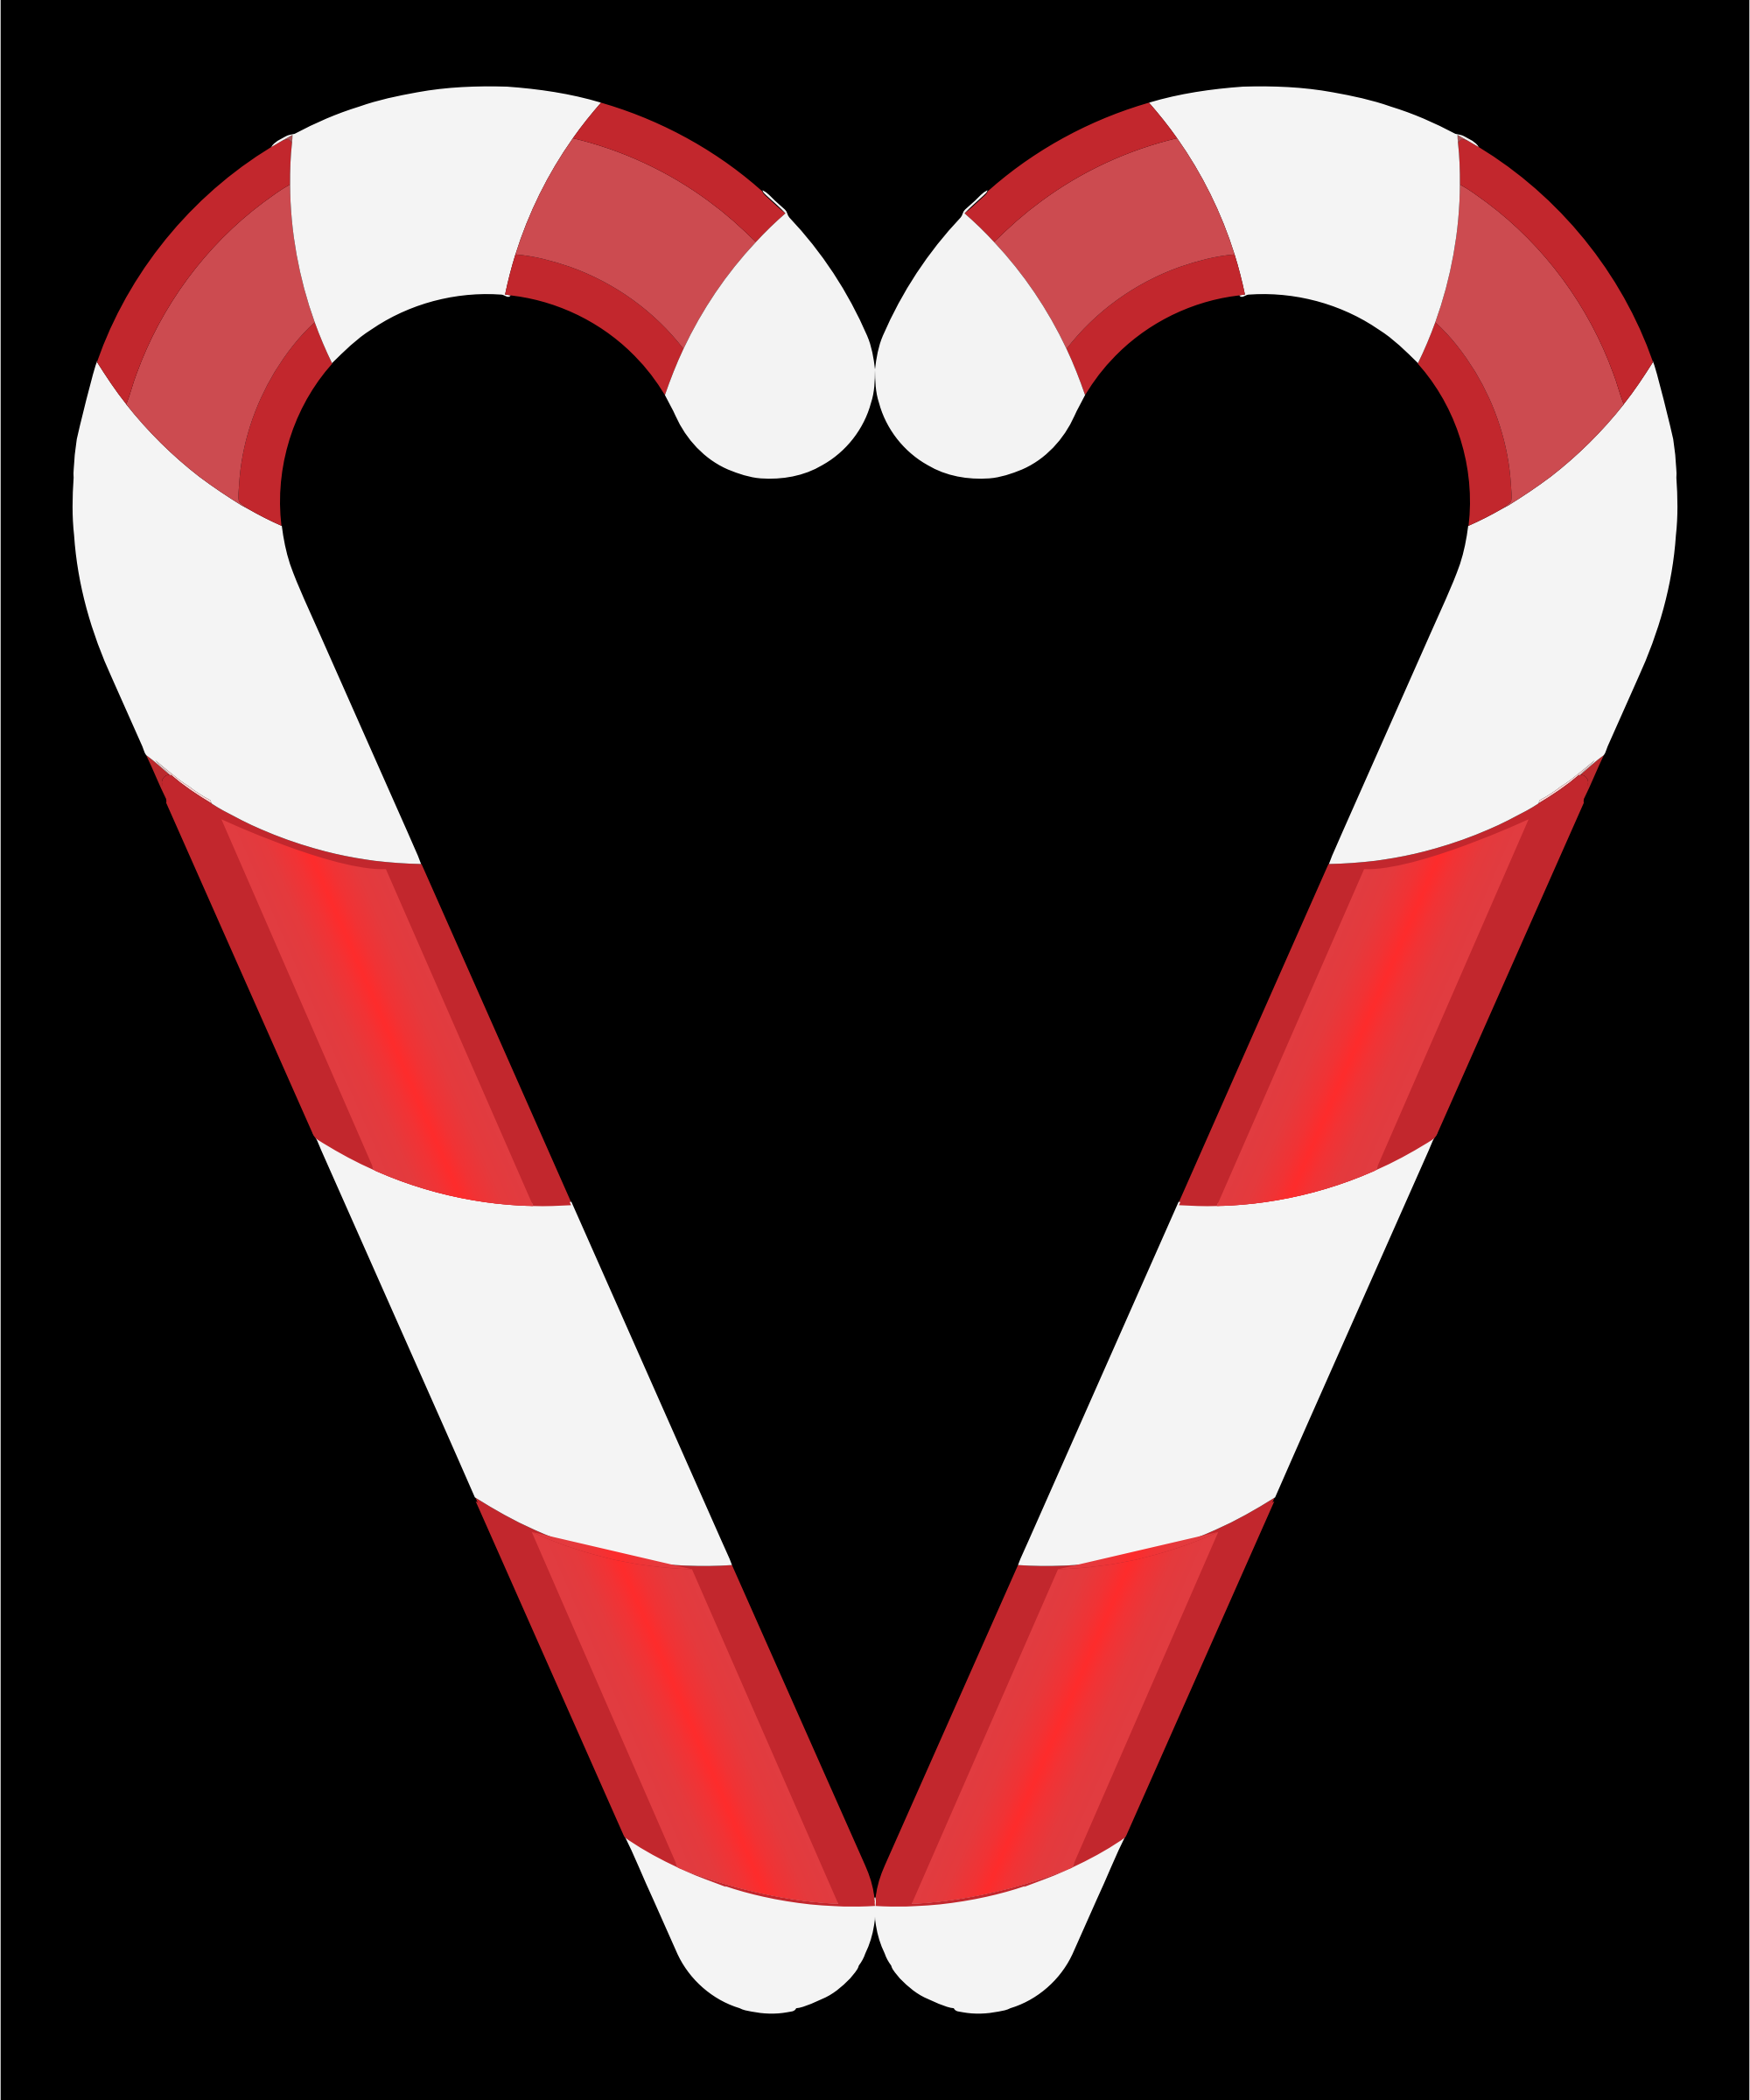 Download Clipart - Candy Cane Heart